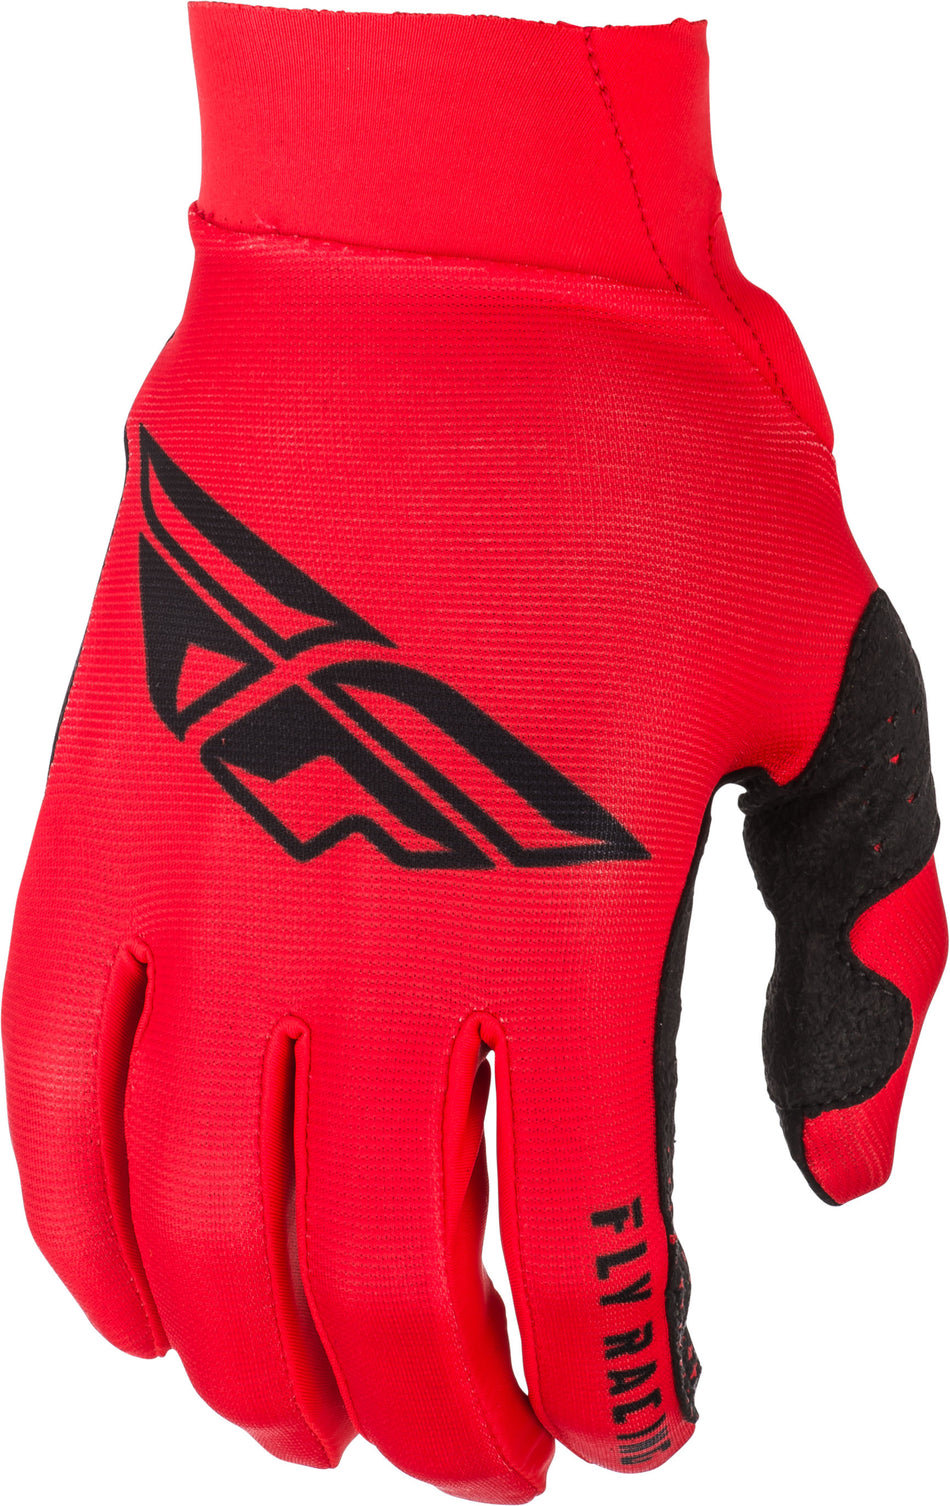 FLY RACING Pro Lite Gloves Red/Black Sz 11 372-81211